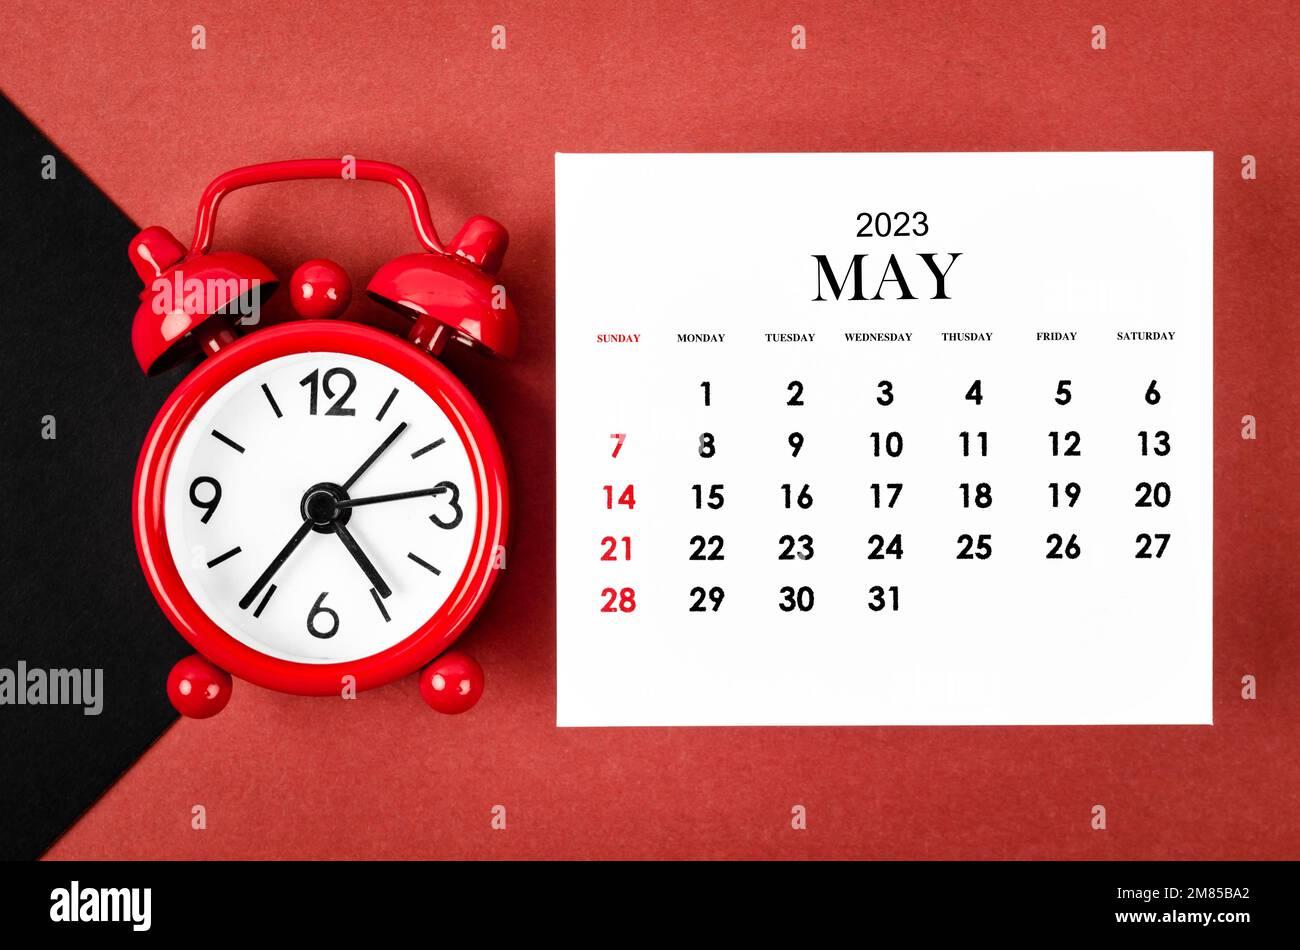 May 2023 Monthly calendar year with alarm clock on red and black